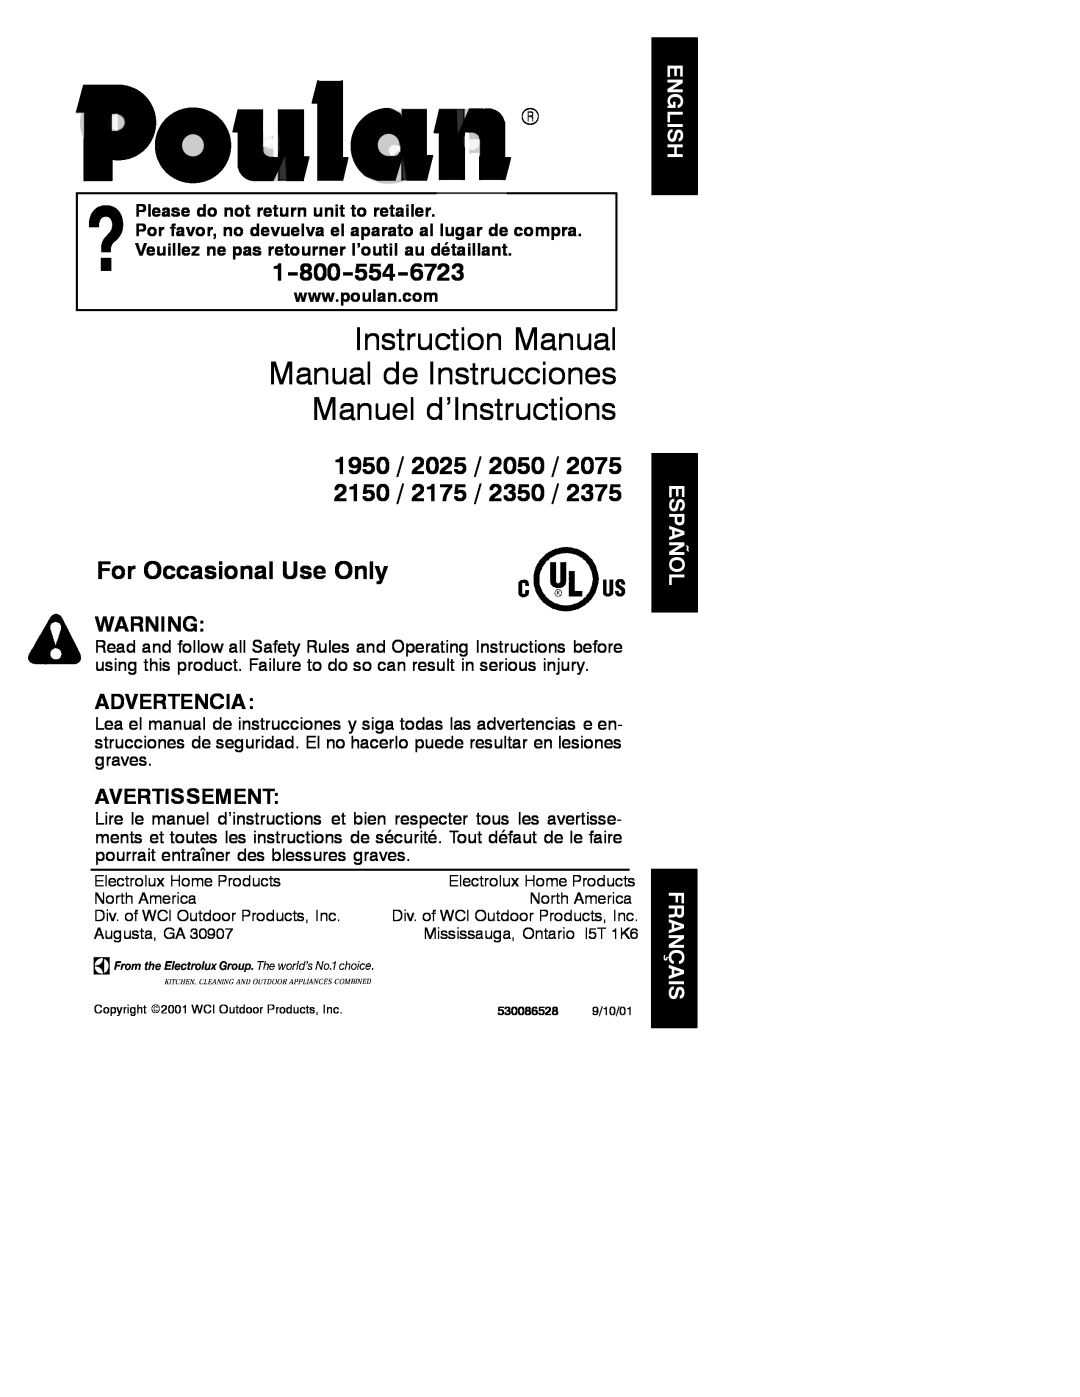 Poulan 530086528 instruction manual Manuel d’Instructions, 1950 / 2025 / 2050 / 2150 / 2175, For Occasional Use Only 